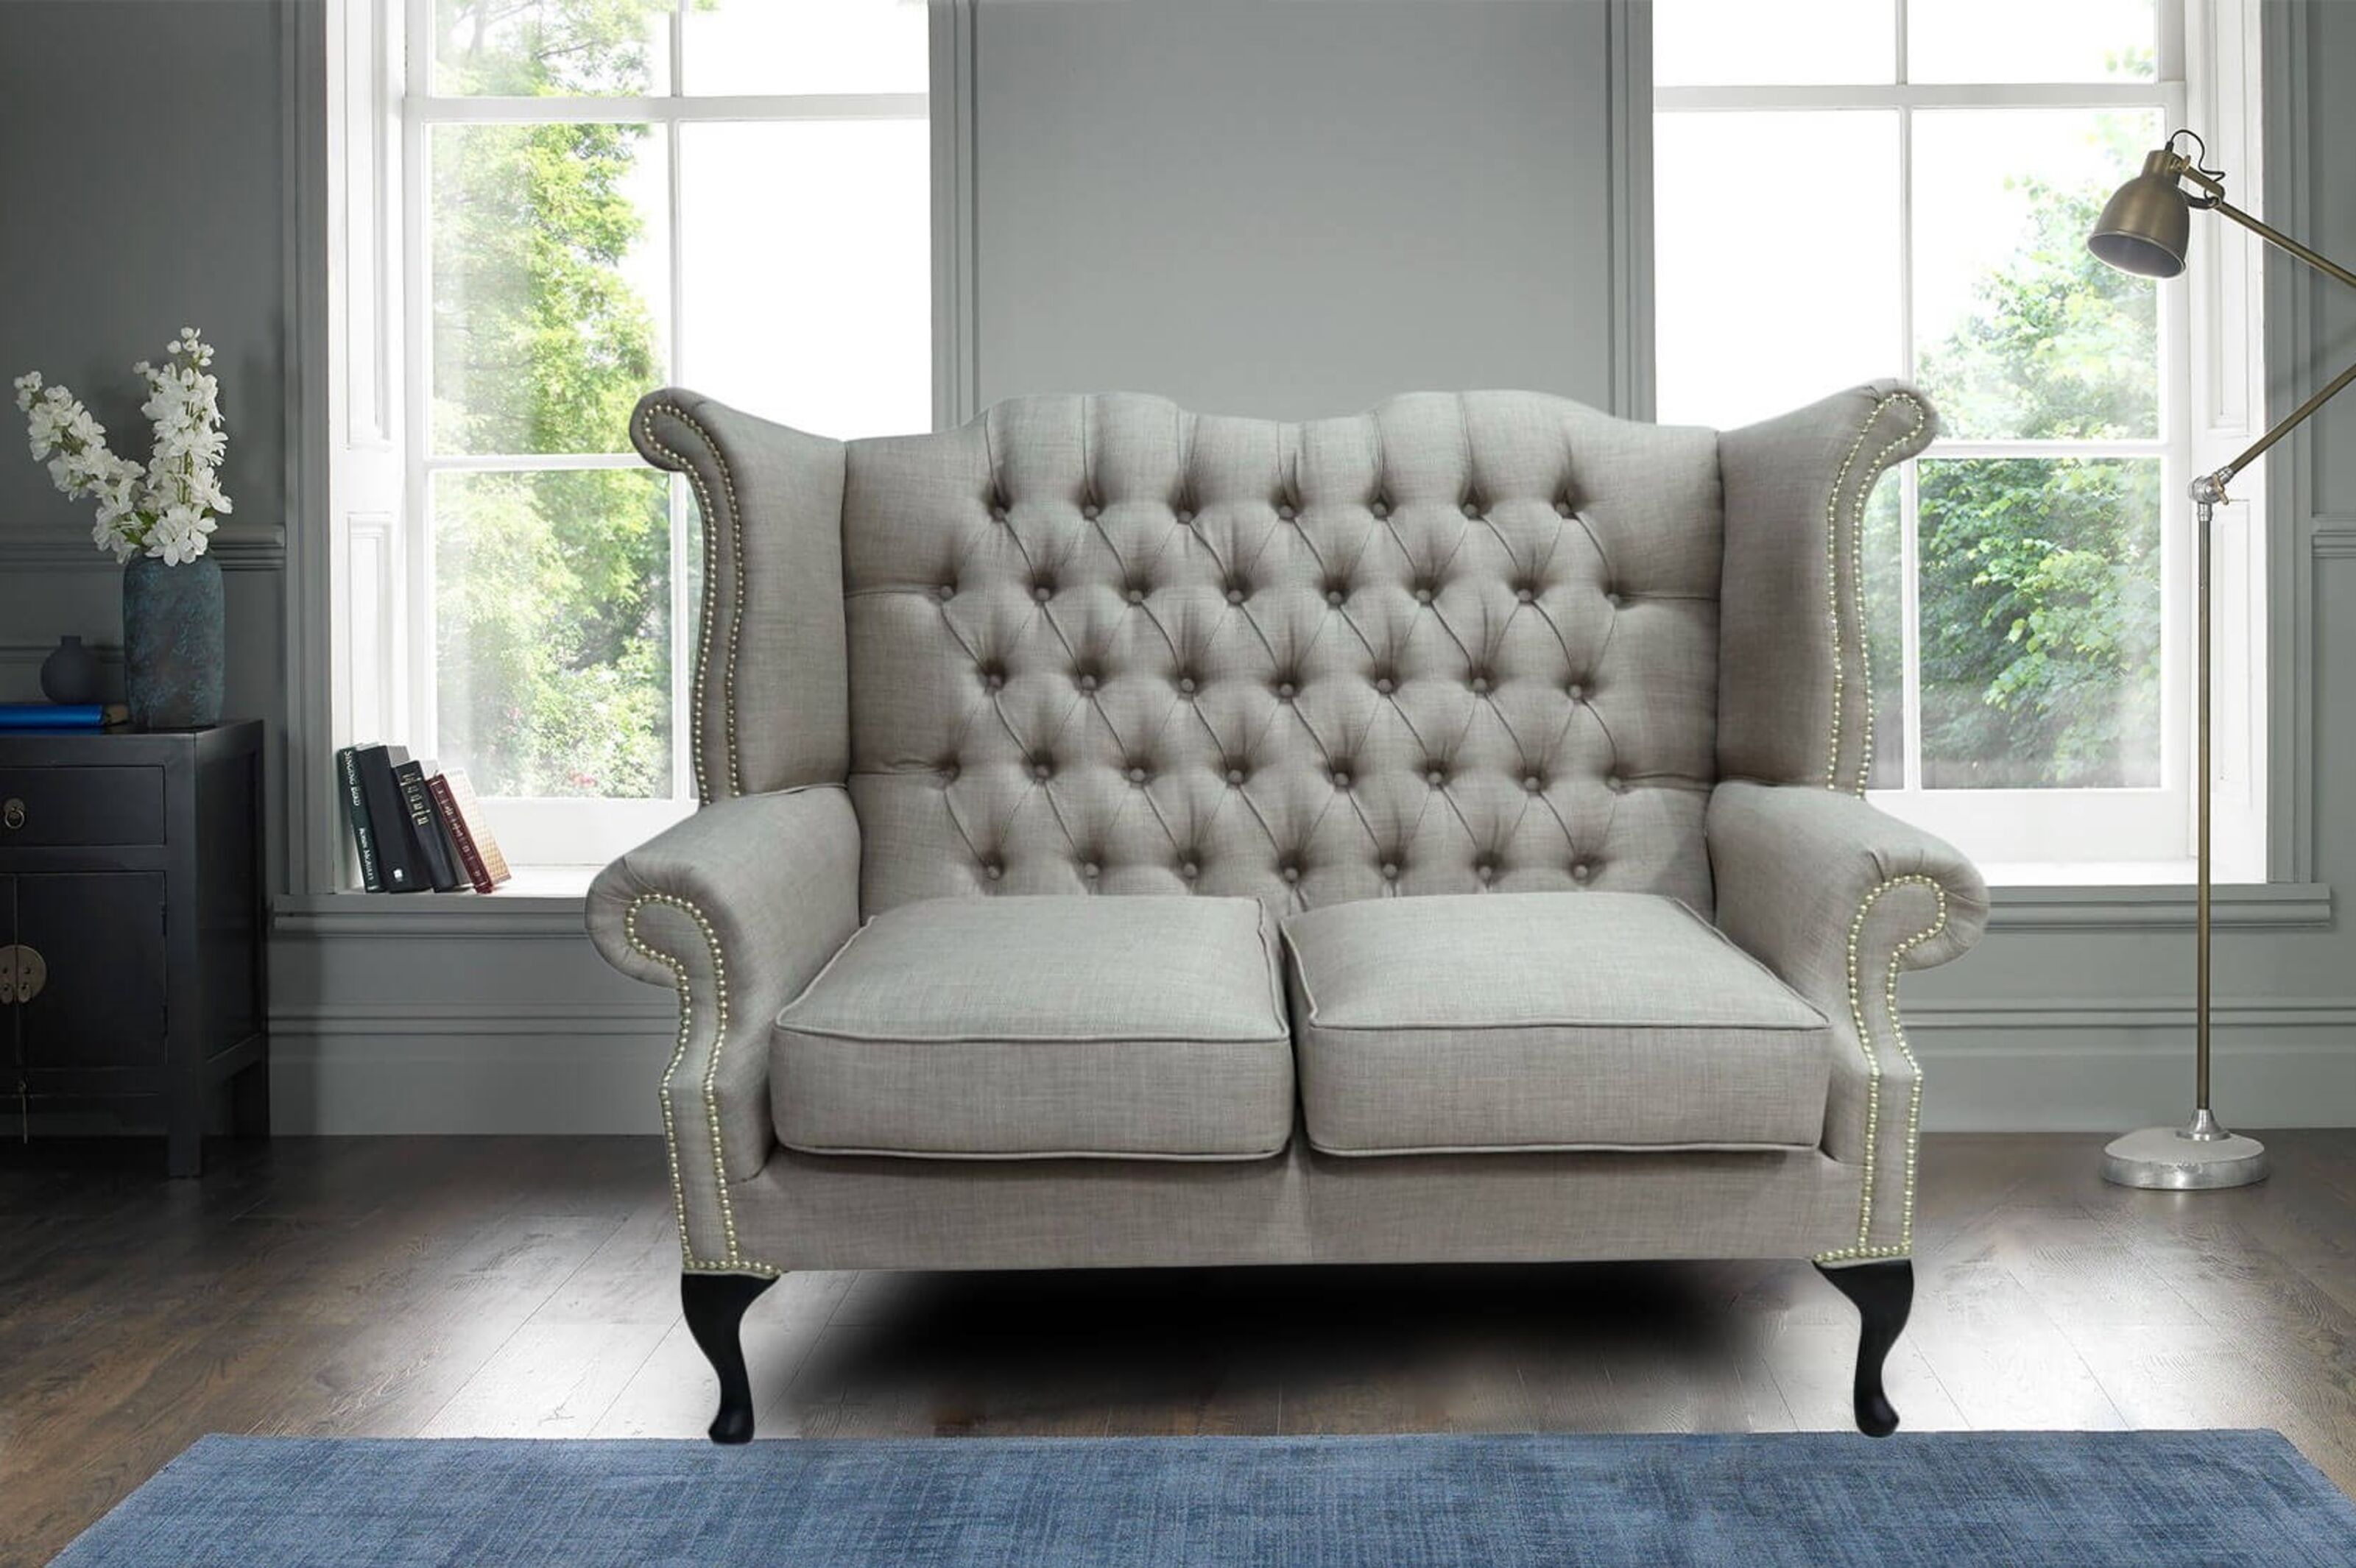 Hassle-Free Sofa Shopping: Why Buying Online is the Way to Go  %Post Title